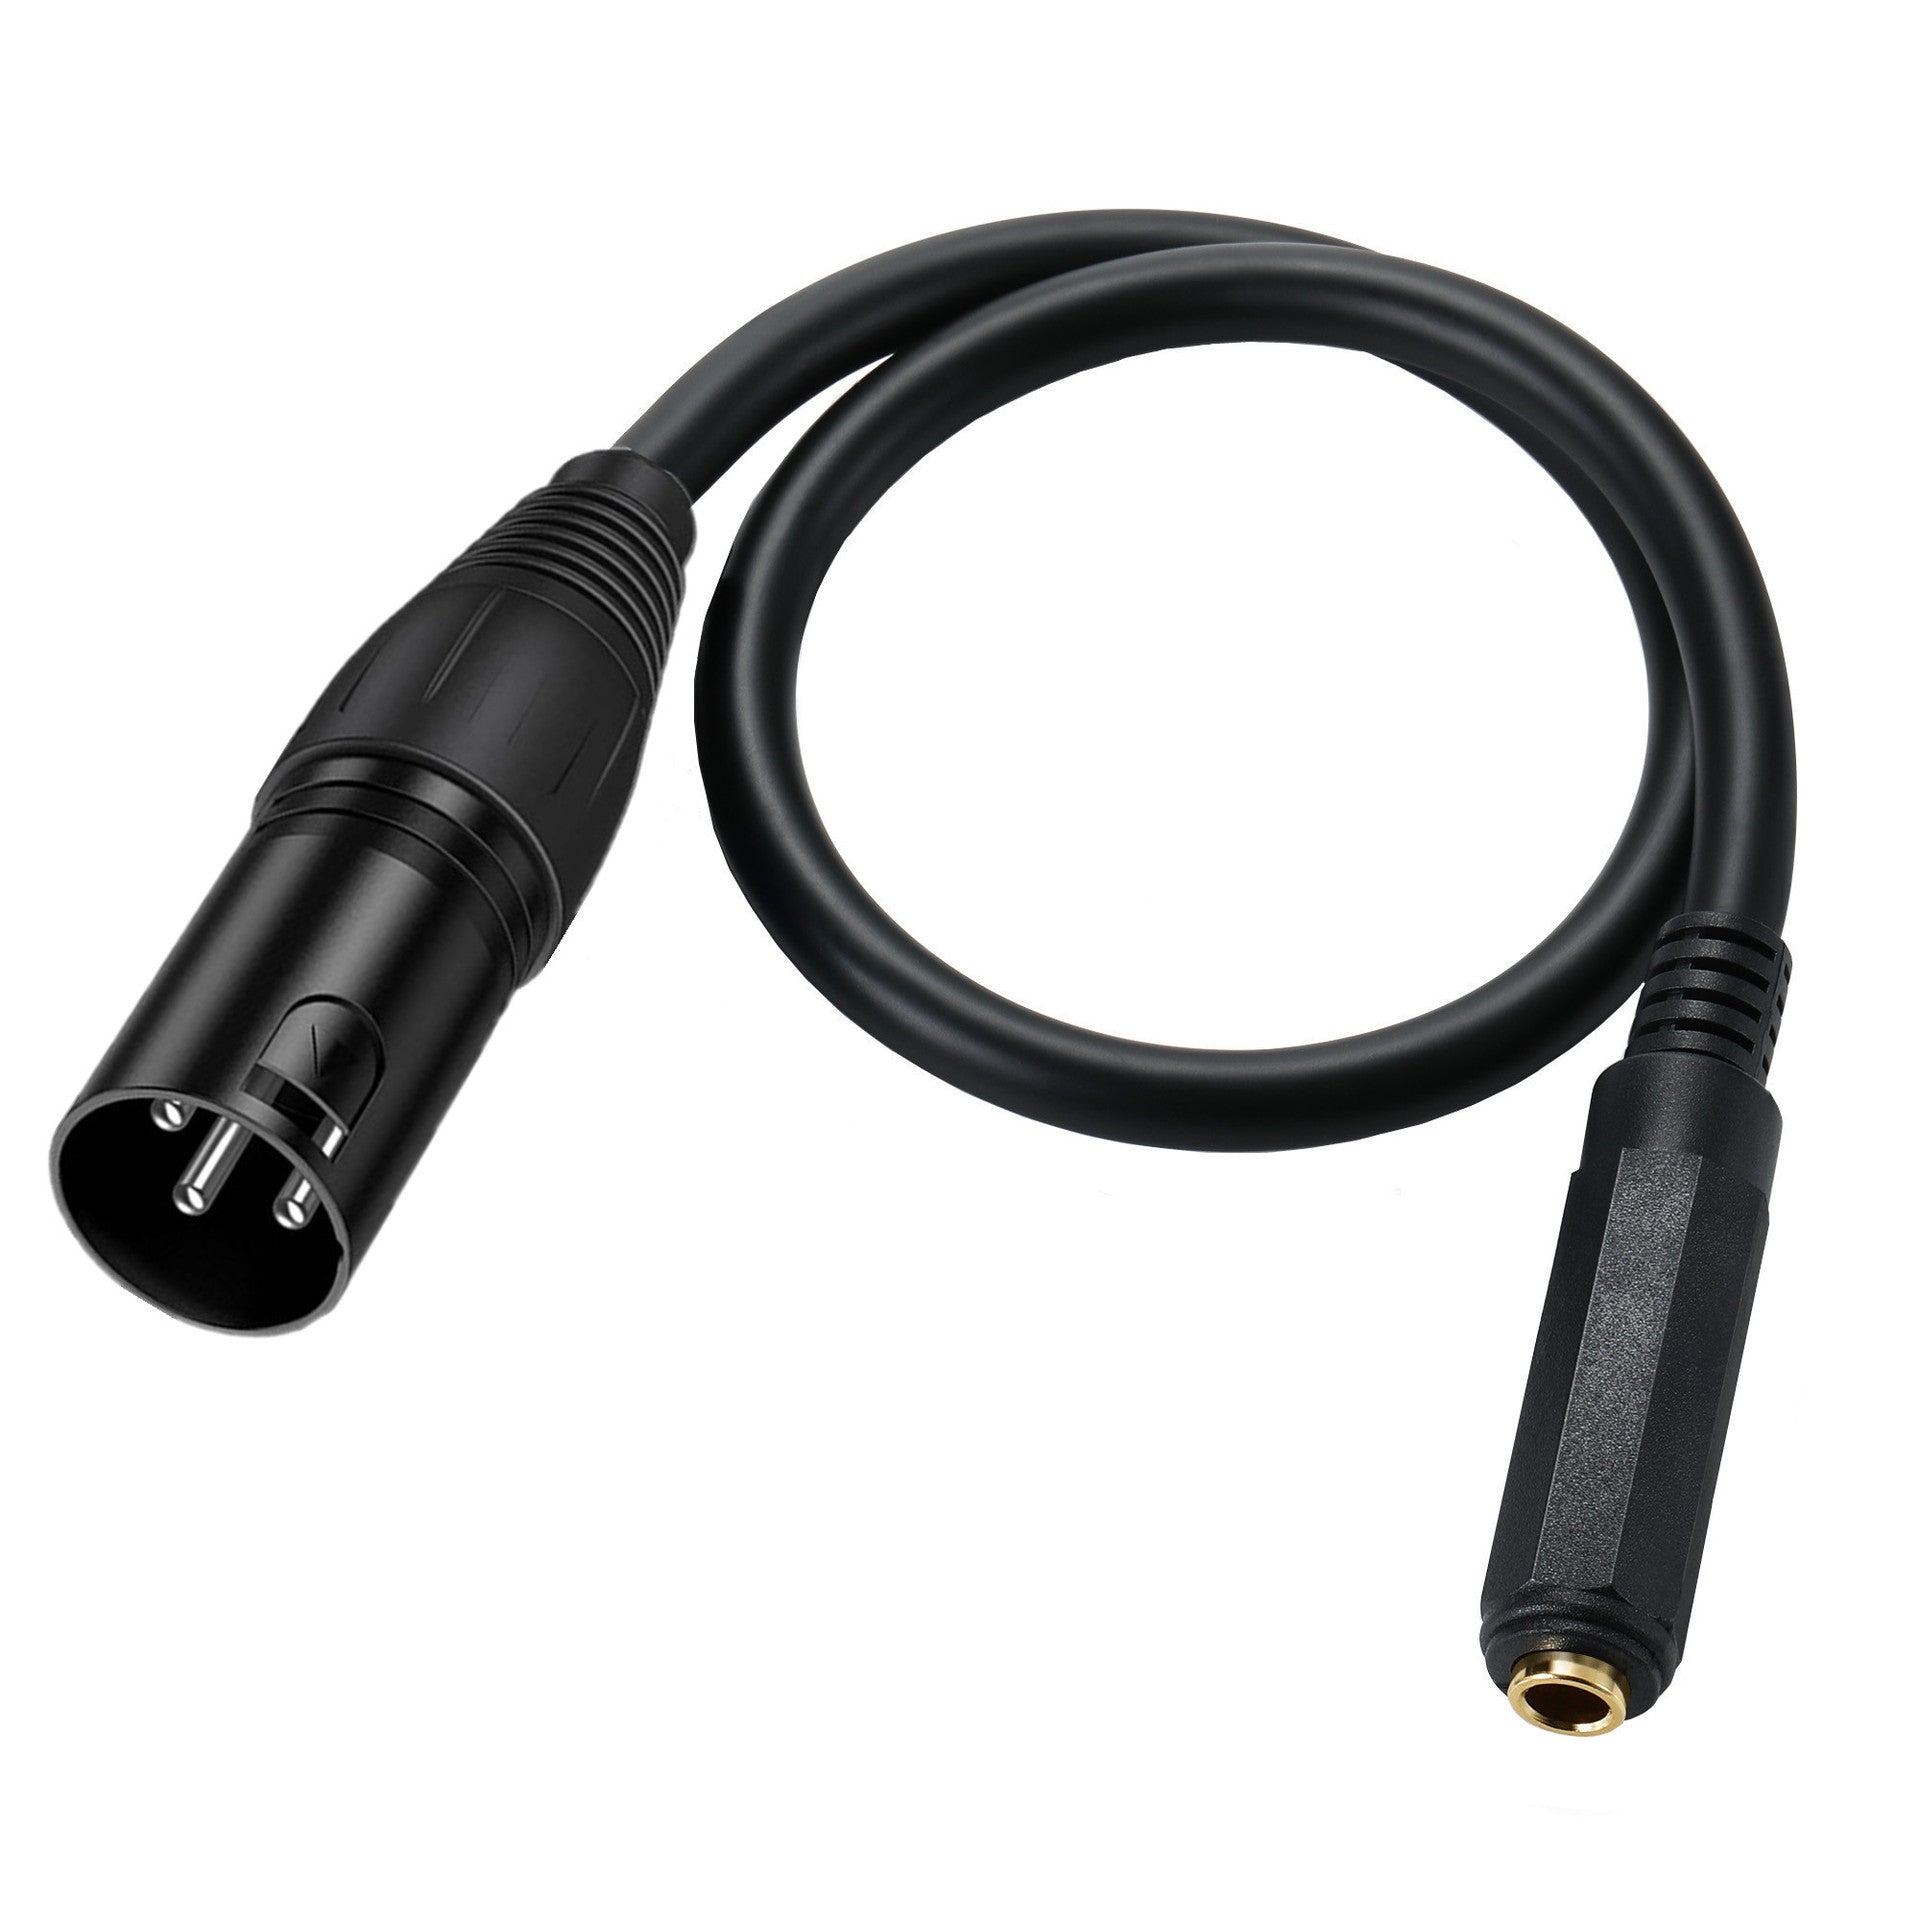 3 Pin XLR Male to 6.35mm 1/4" TRS Female Audio Converter Cable